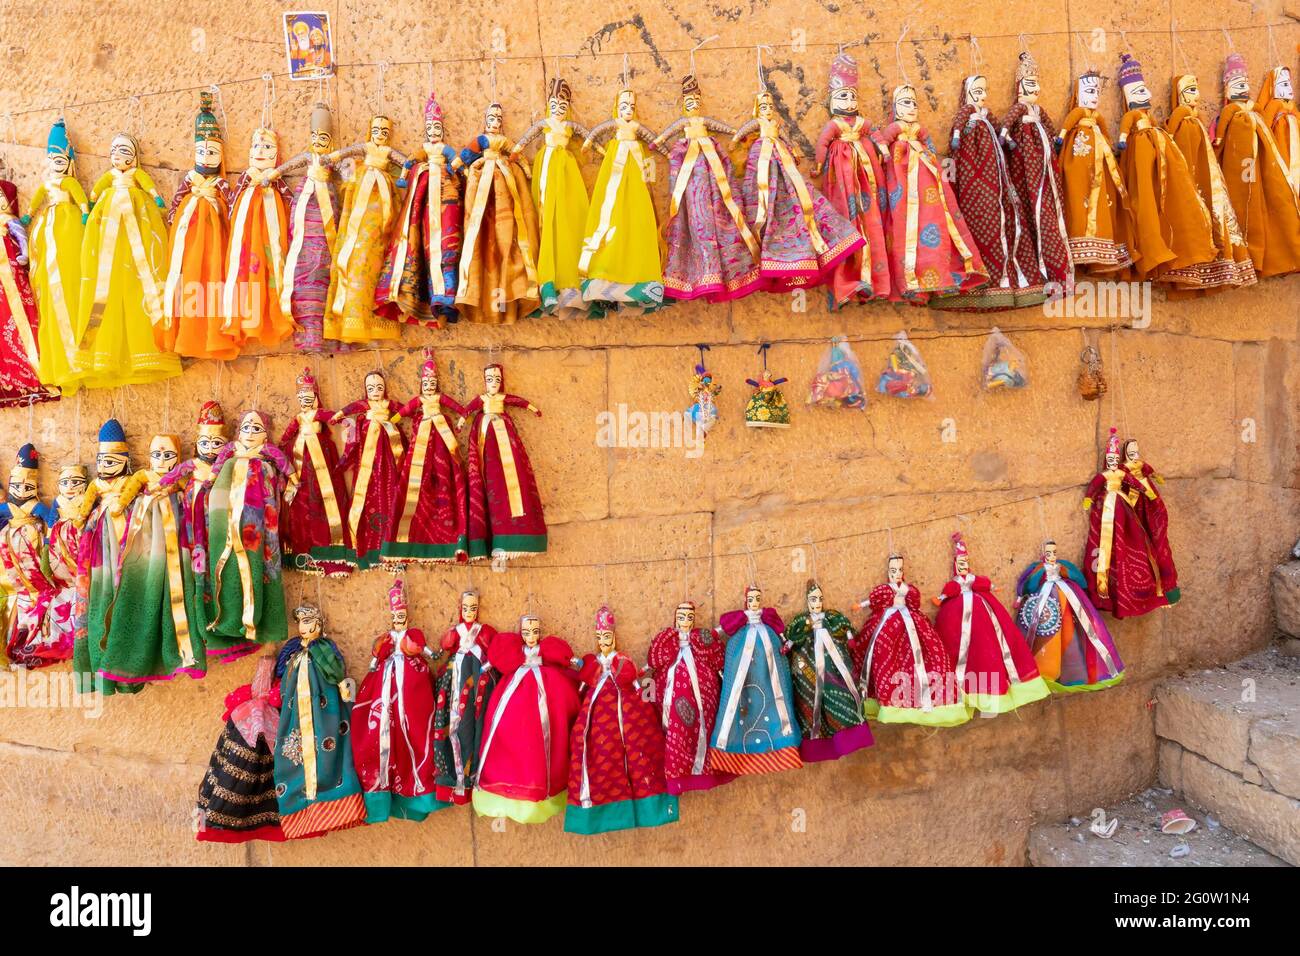 Traditional King and queen, called Raja Rani, handmade puppets or Katputli Sets are hanging from wall inside Jaislamer fort, Rajasthan, India. Stock Photo